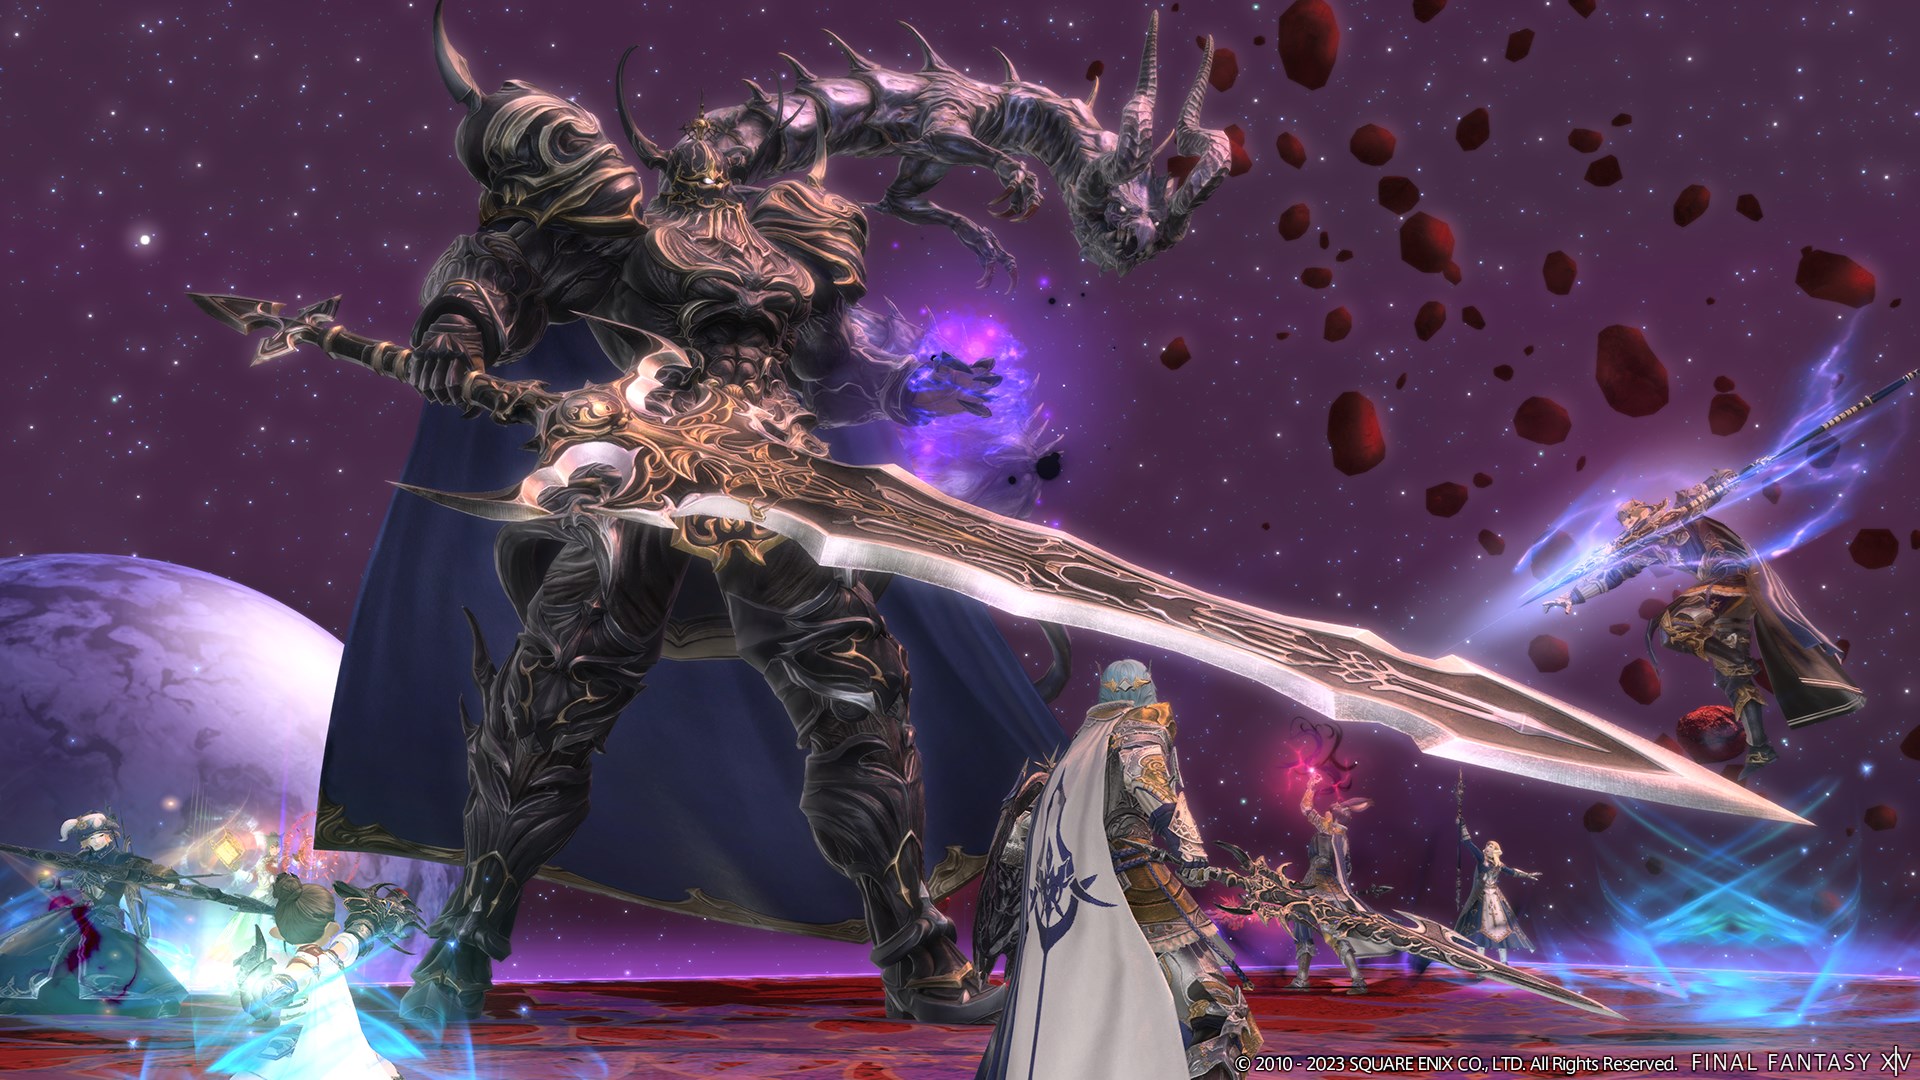 Final Fantasy XIV maintenance timer: when is the patch 6.4 Maintenance over?